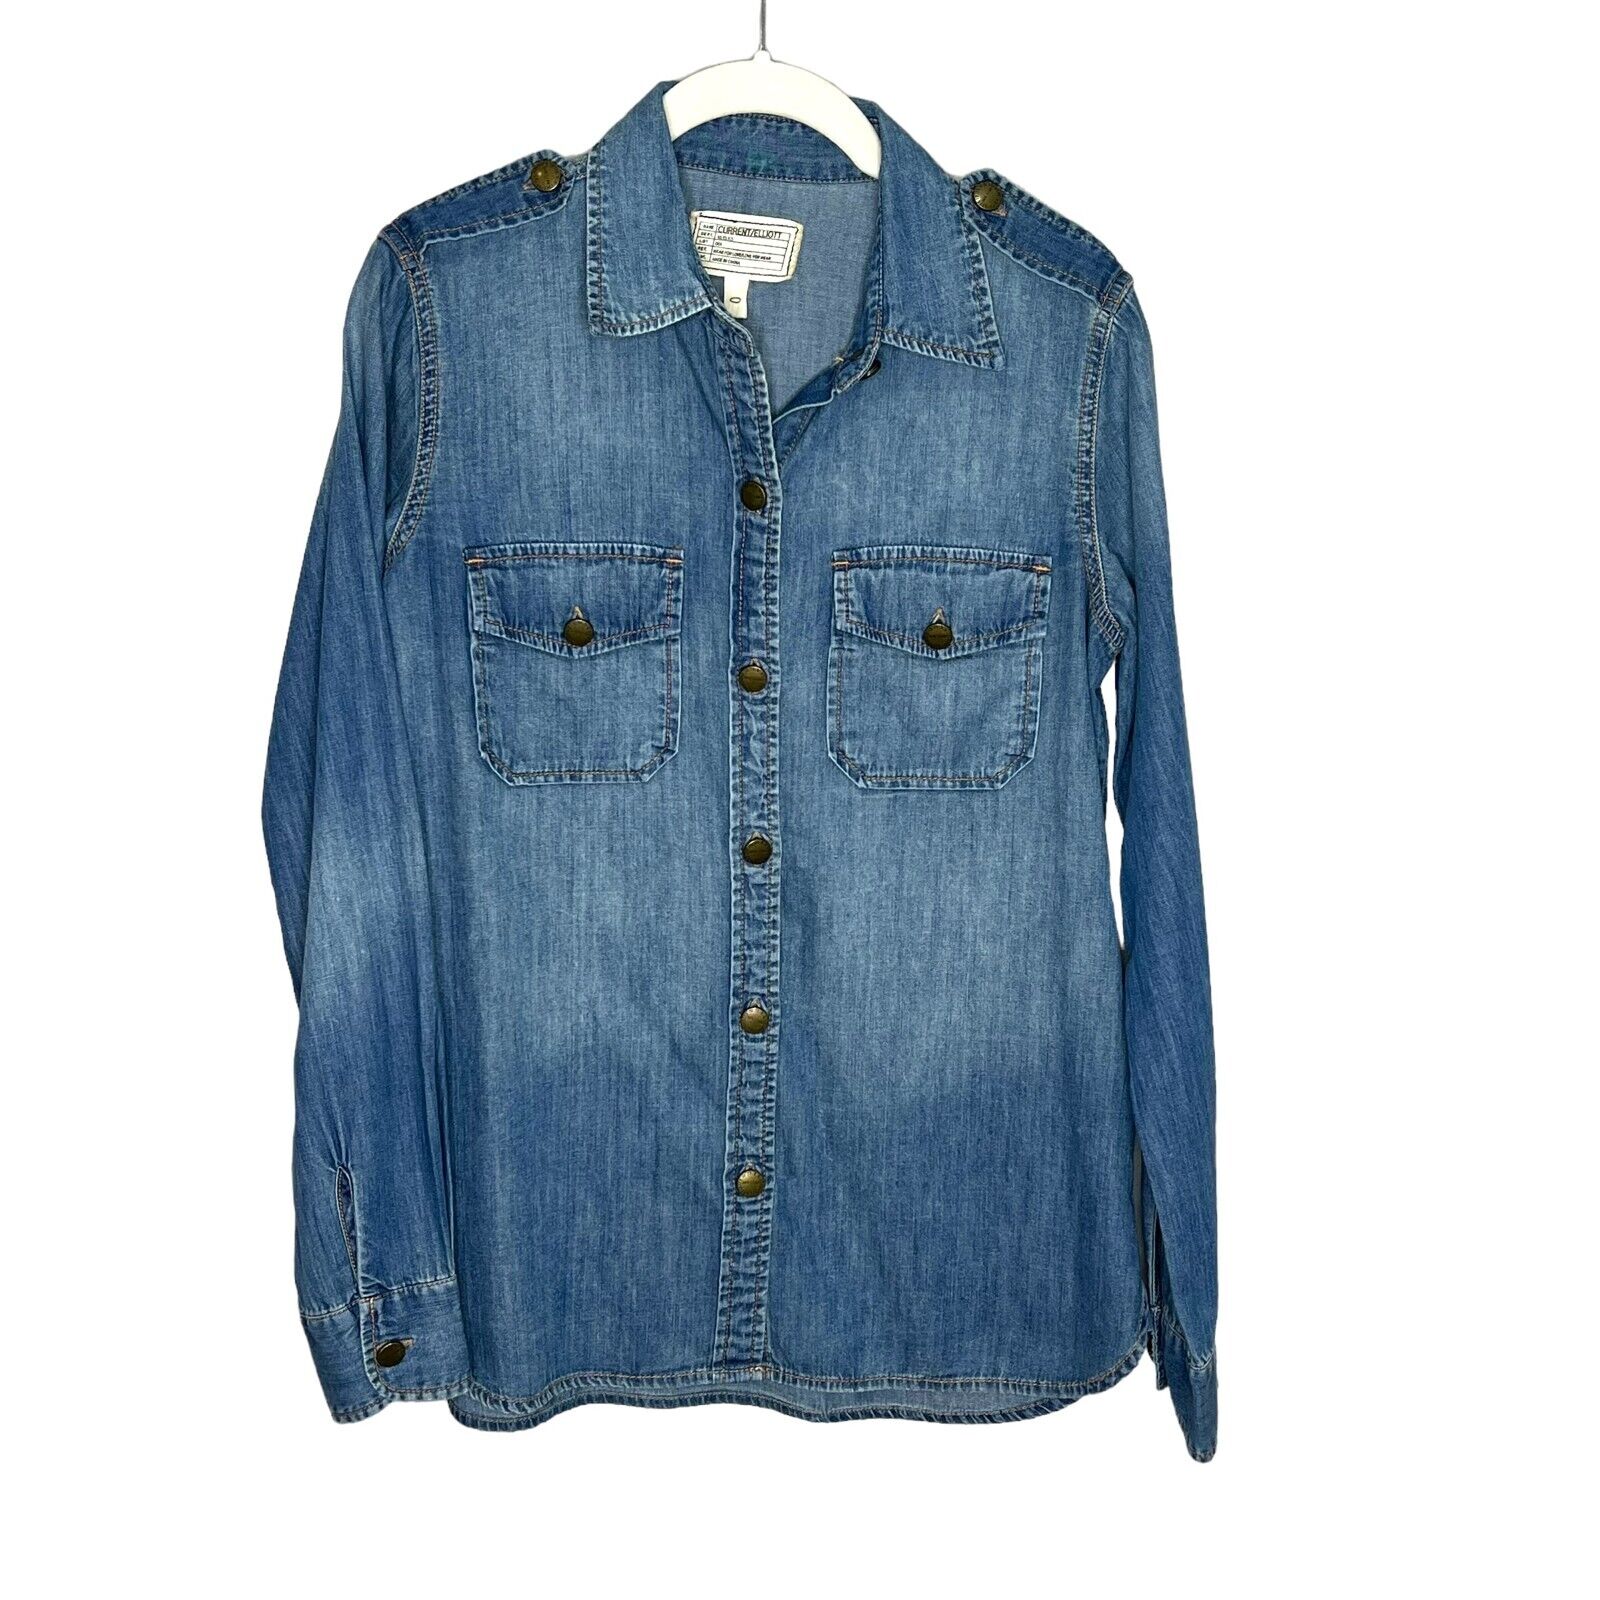 CURRENT/ELLIOTT Women's Blue Chambray The Perfect Shirt in Miner XS